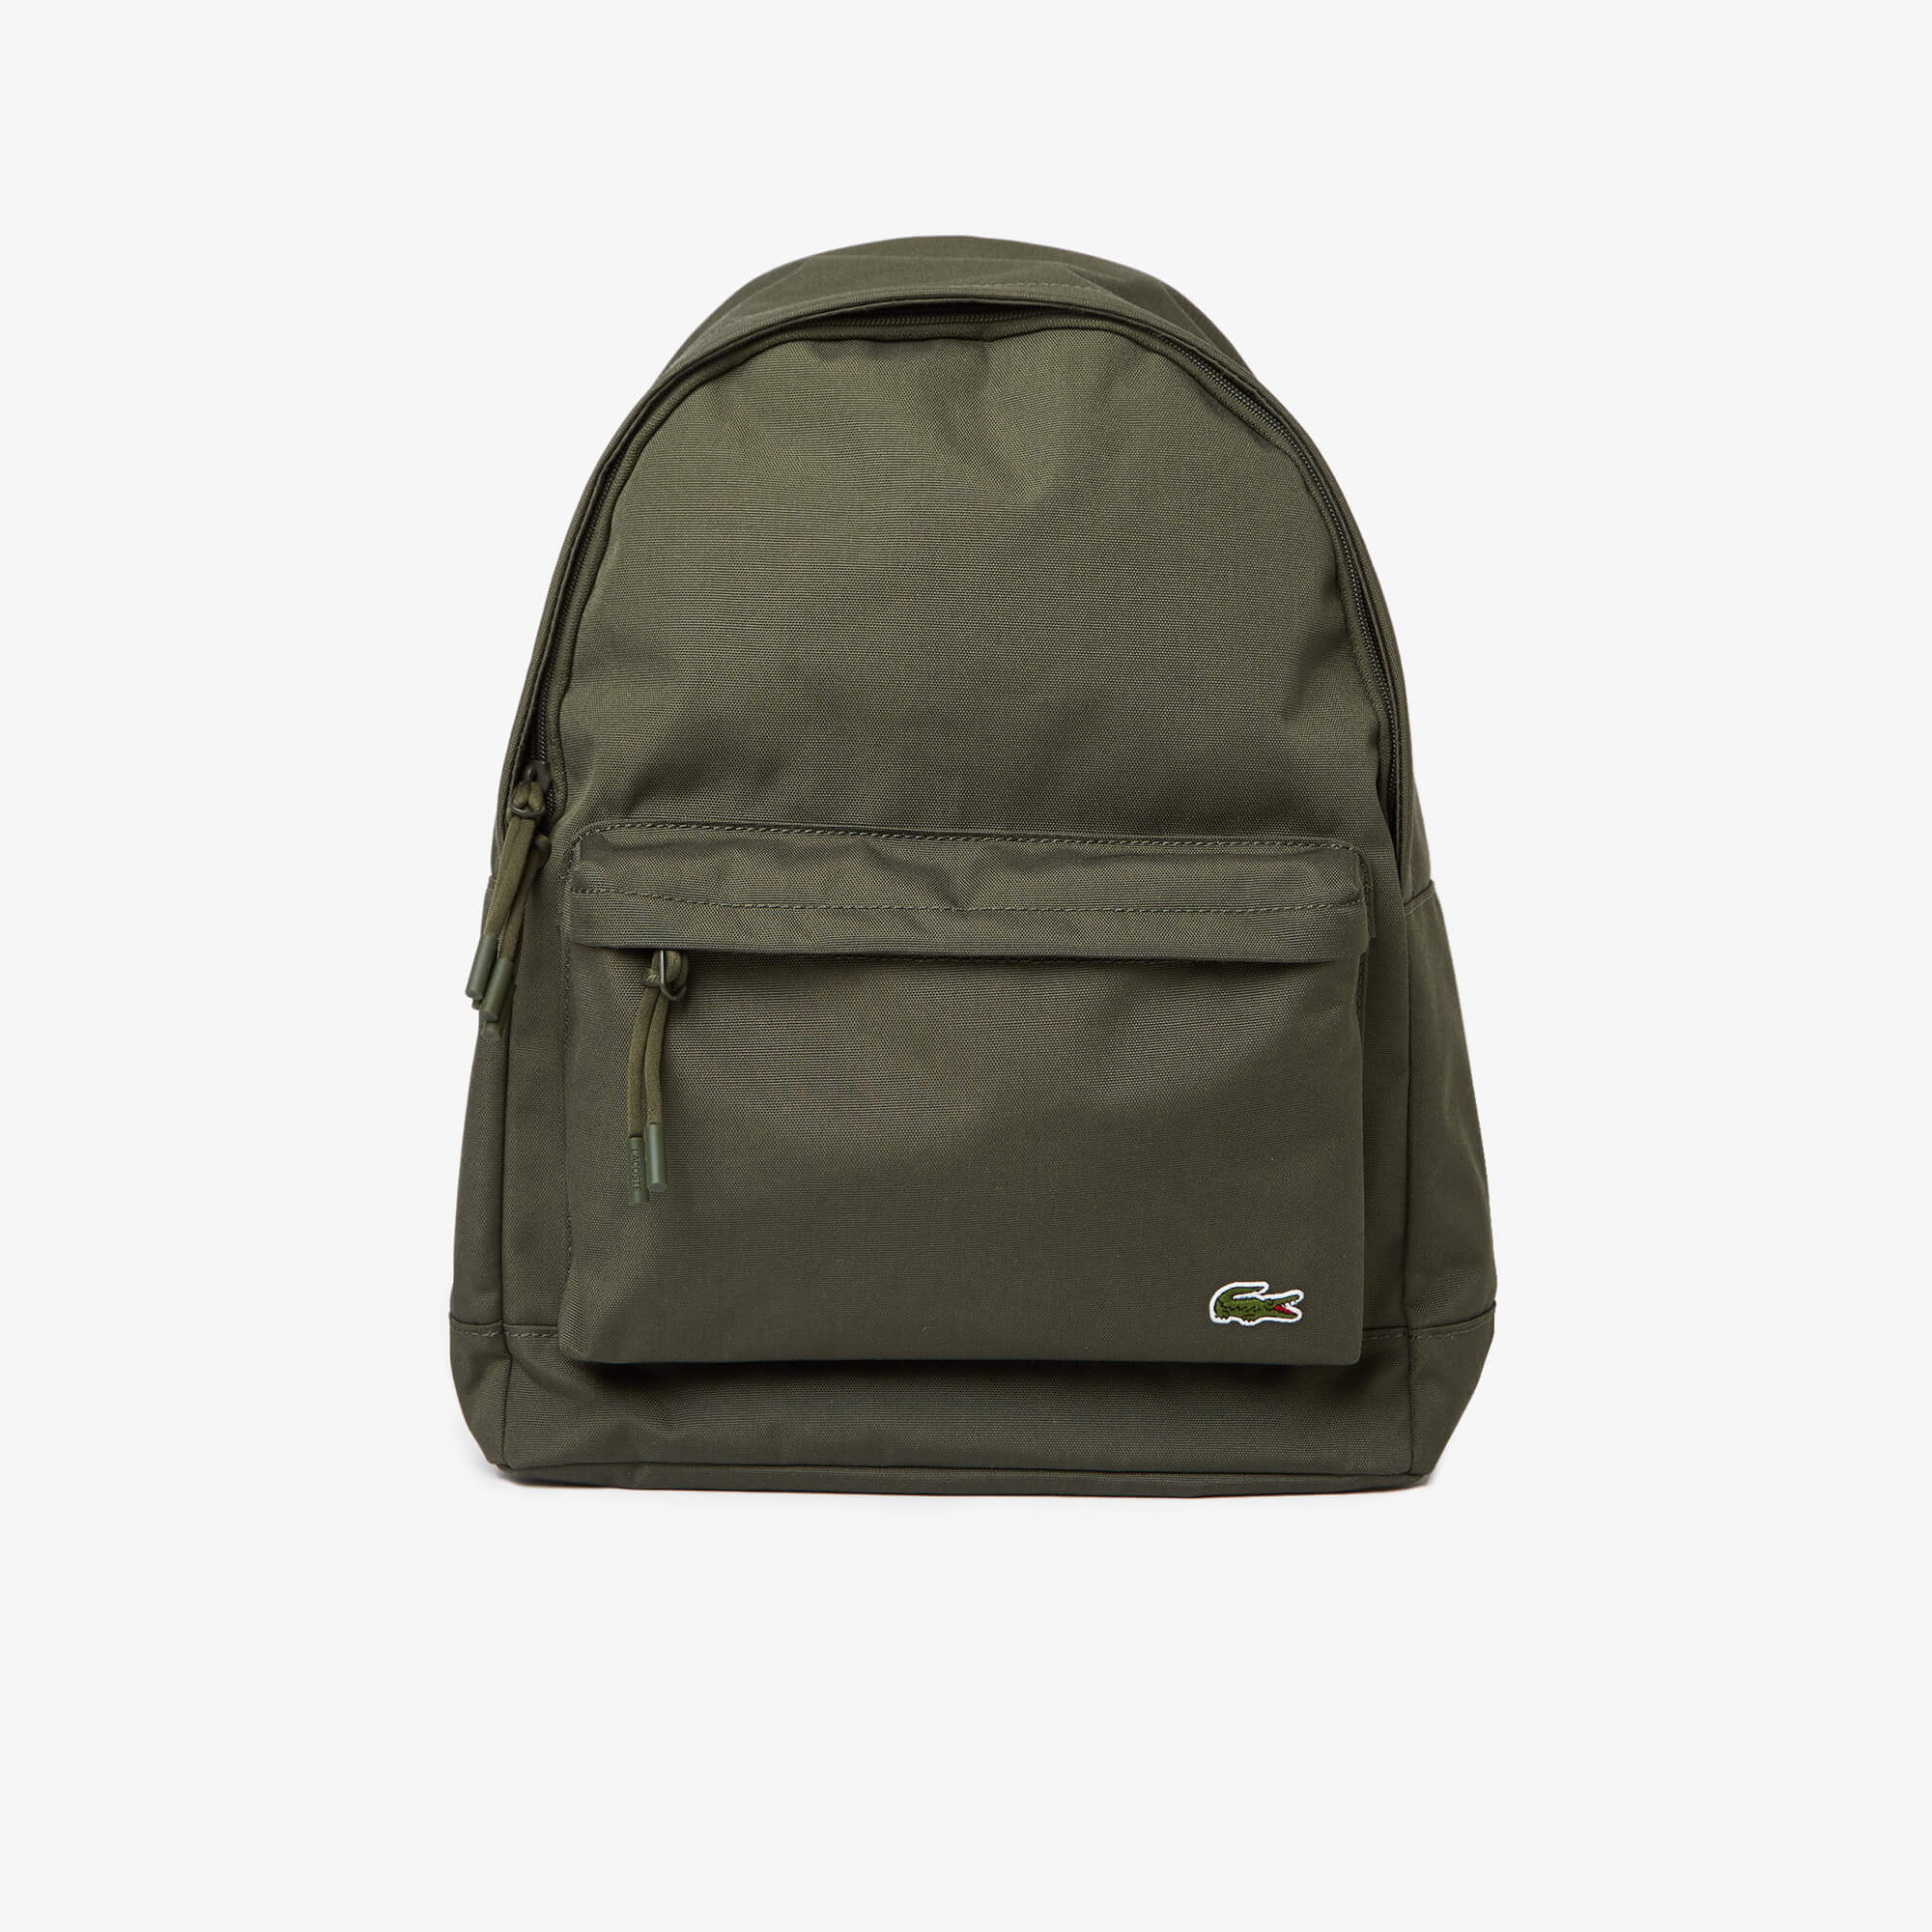 lacoste backpack canada